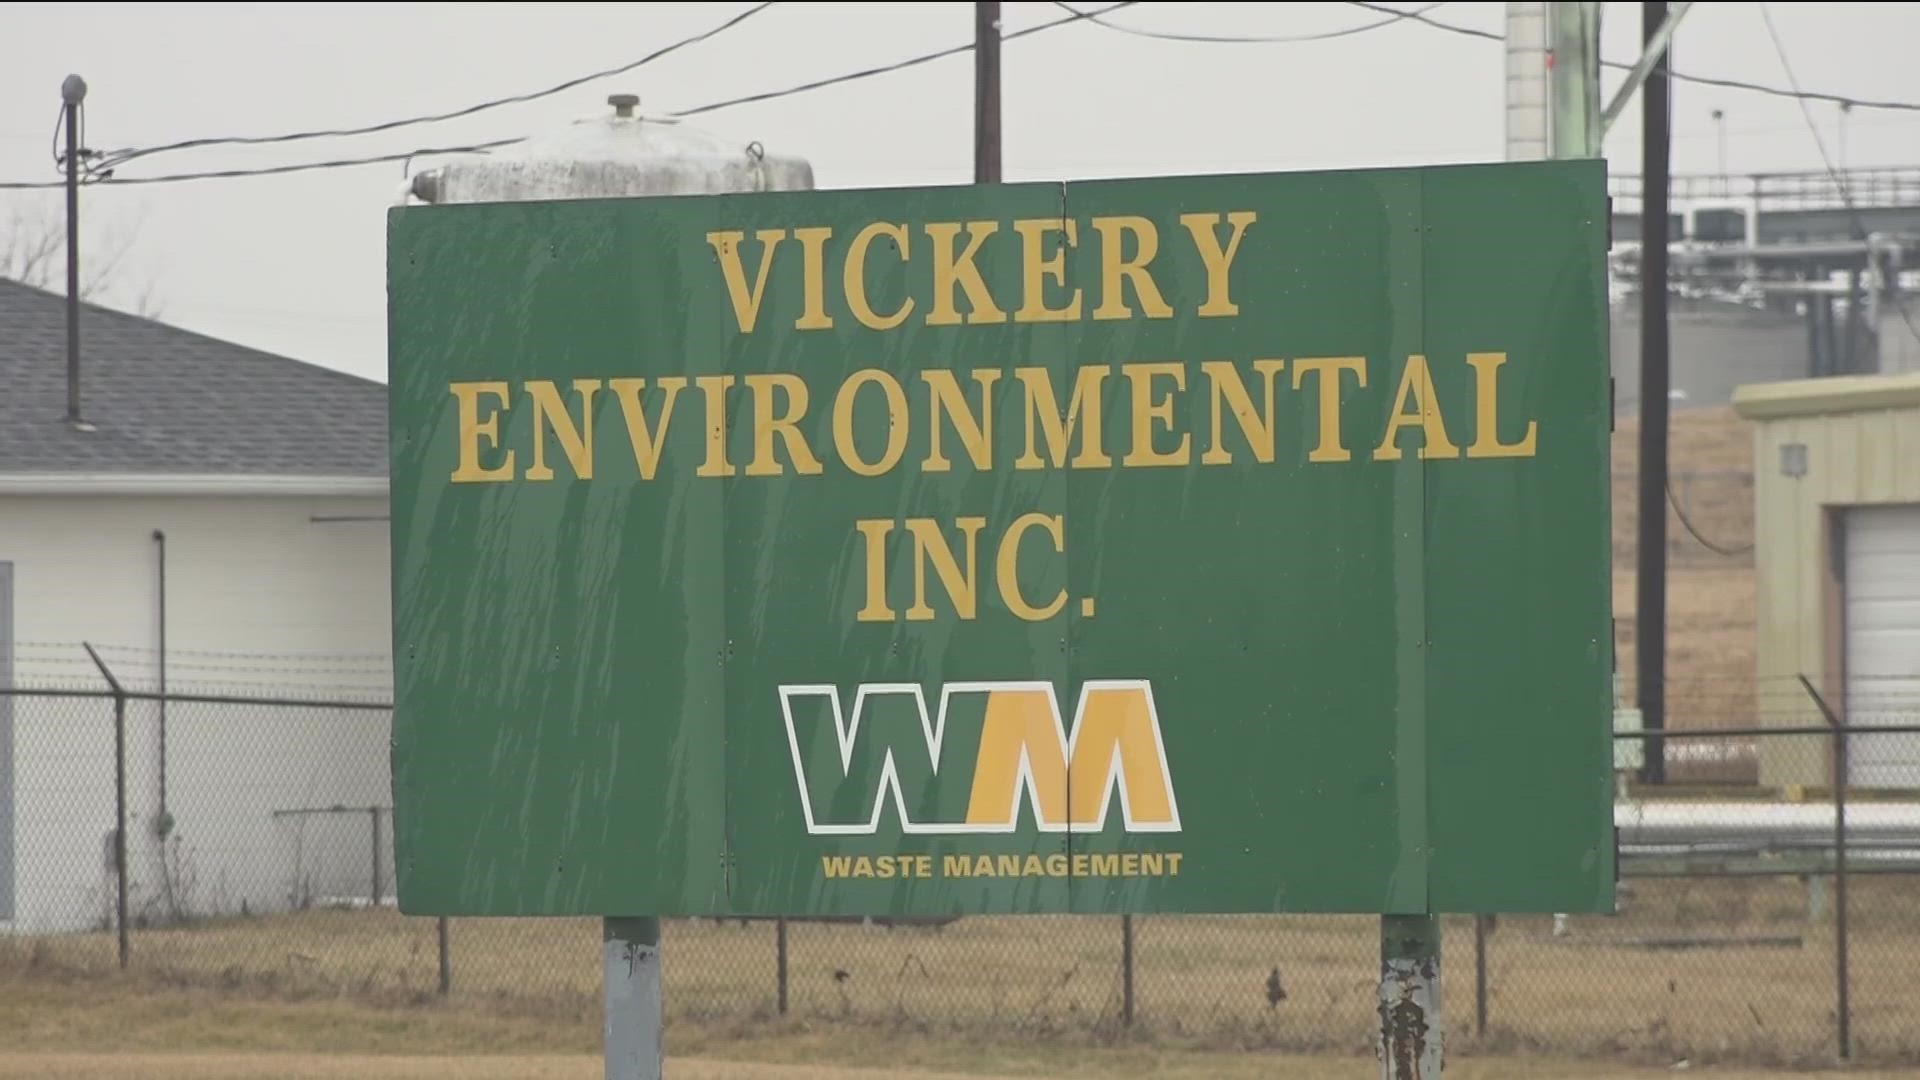 Ohio Rep. Gary Click, R-Vickery, said he is disappointed to learn the waste is being shipped to the Sandusky County community and is concerned for residents' safety.